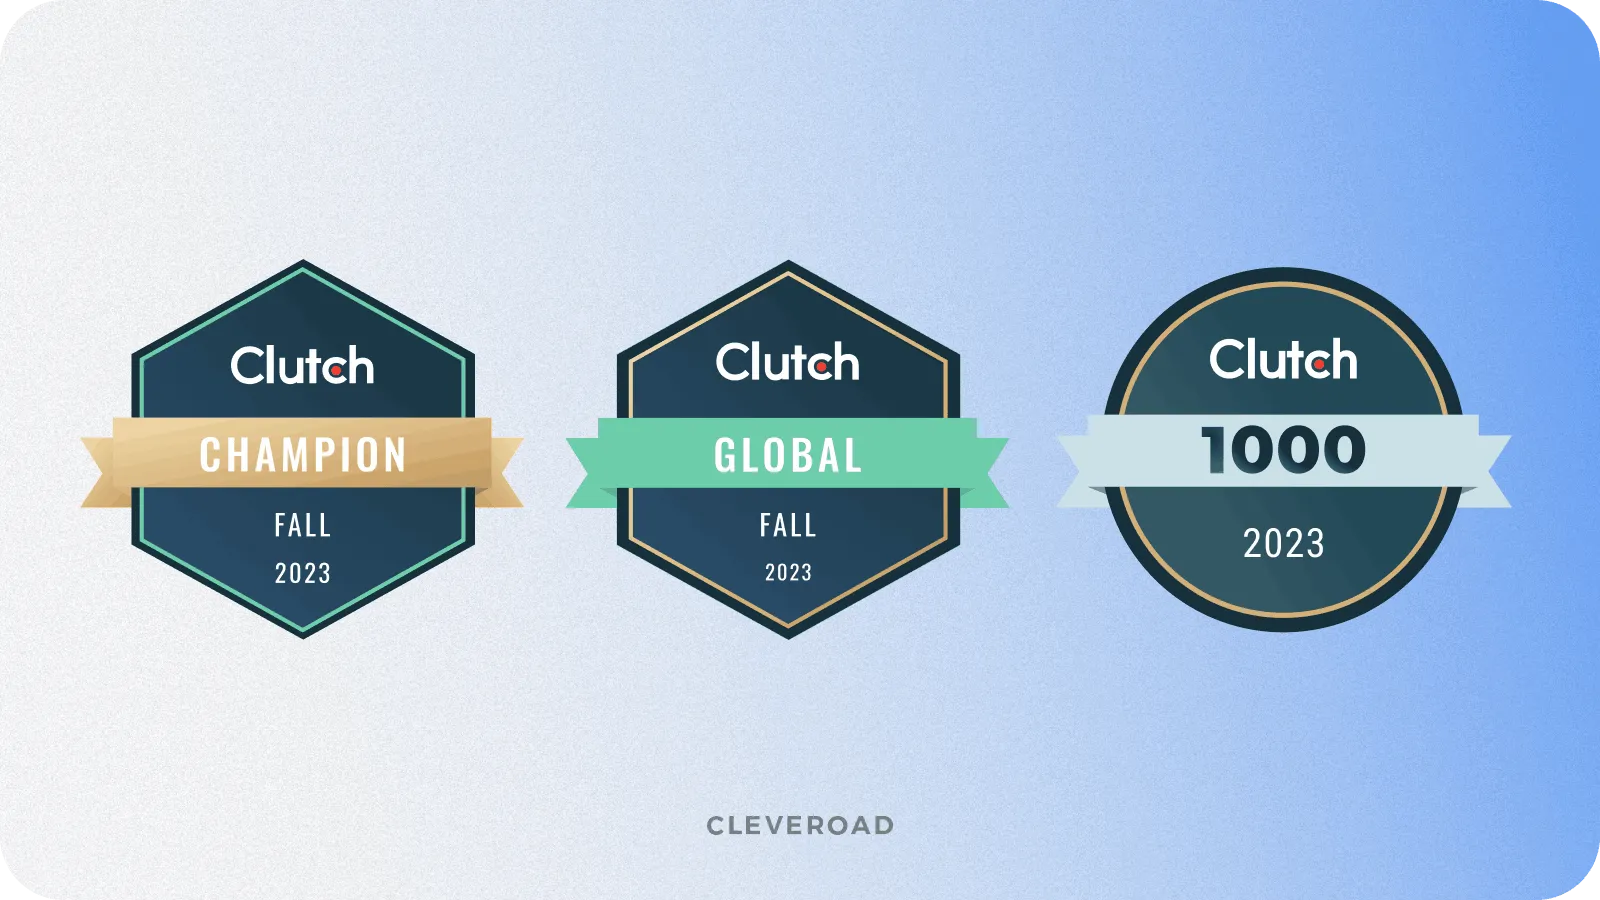 Cleveroad is among the top IT providers